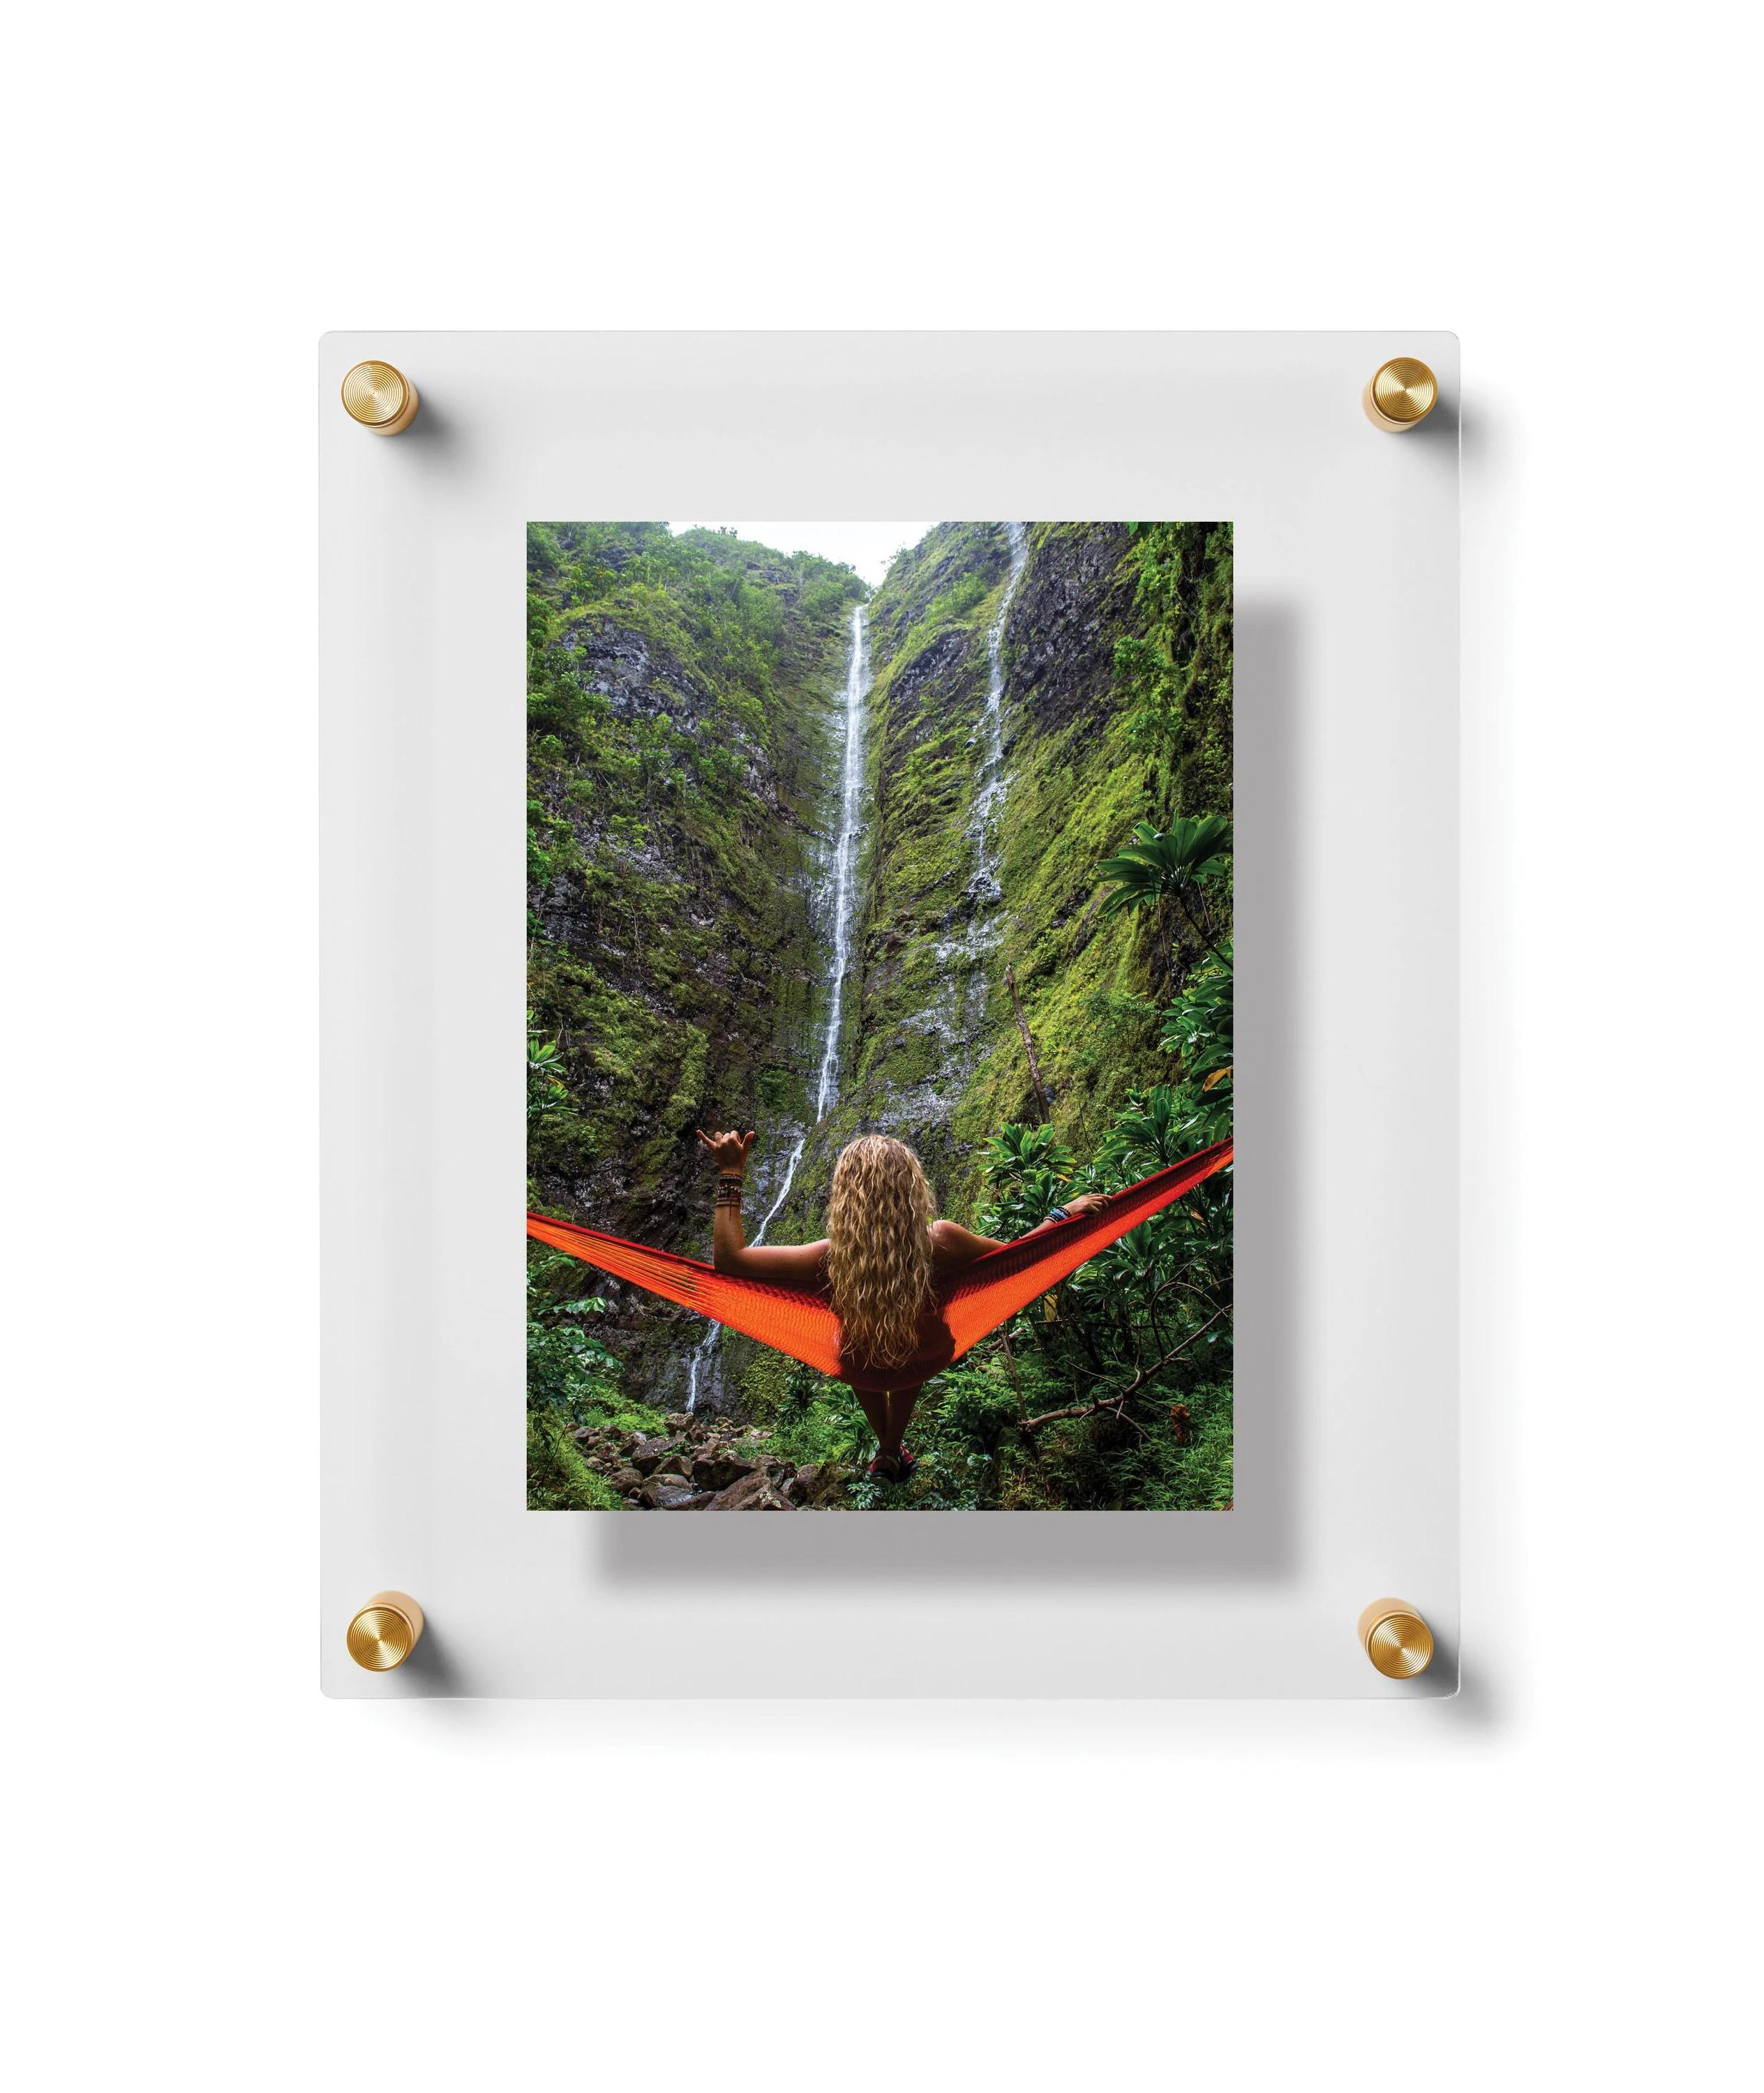 Acrylic Wall Mounted Sign Holder Photo Frame For Poster